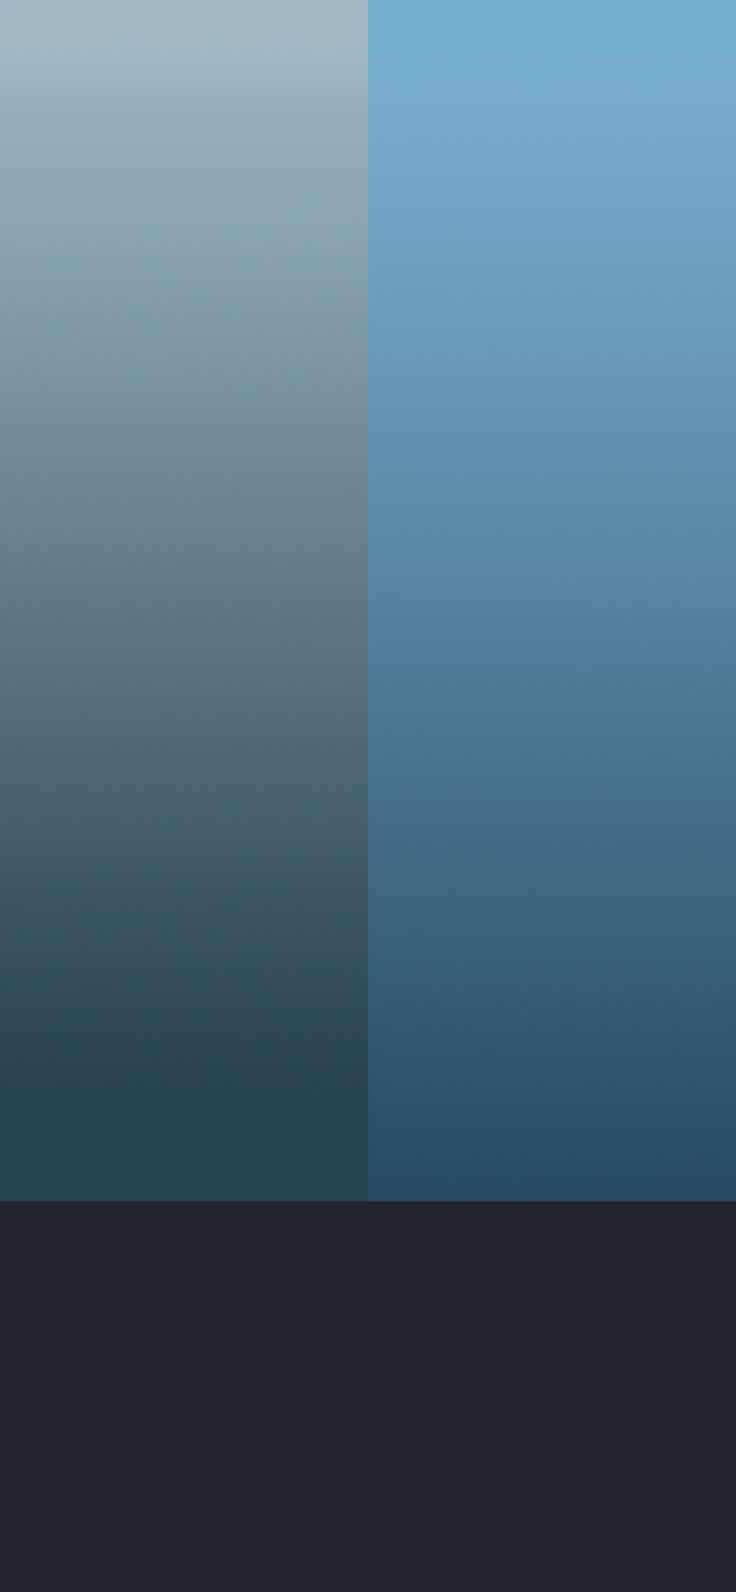 Pacific Blue with solid Dock. DUAL. Galaxy phone wallpaper, Original iphone wallpaper, Apple wallpaper